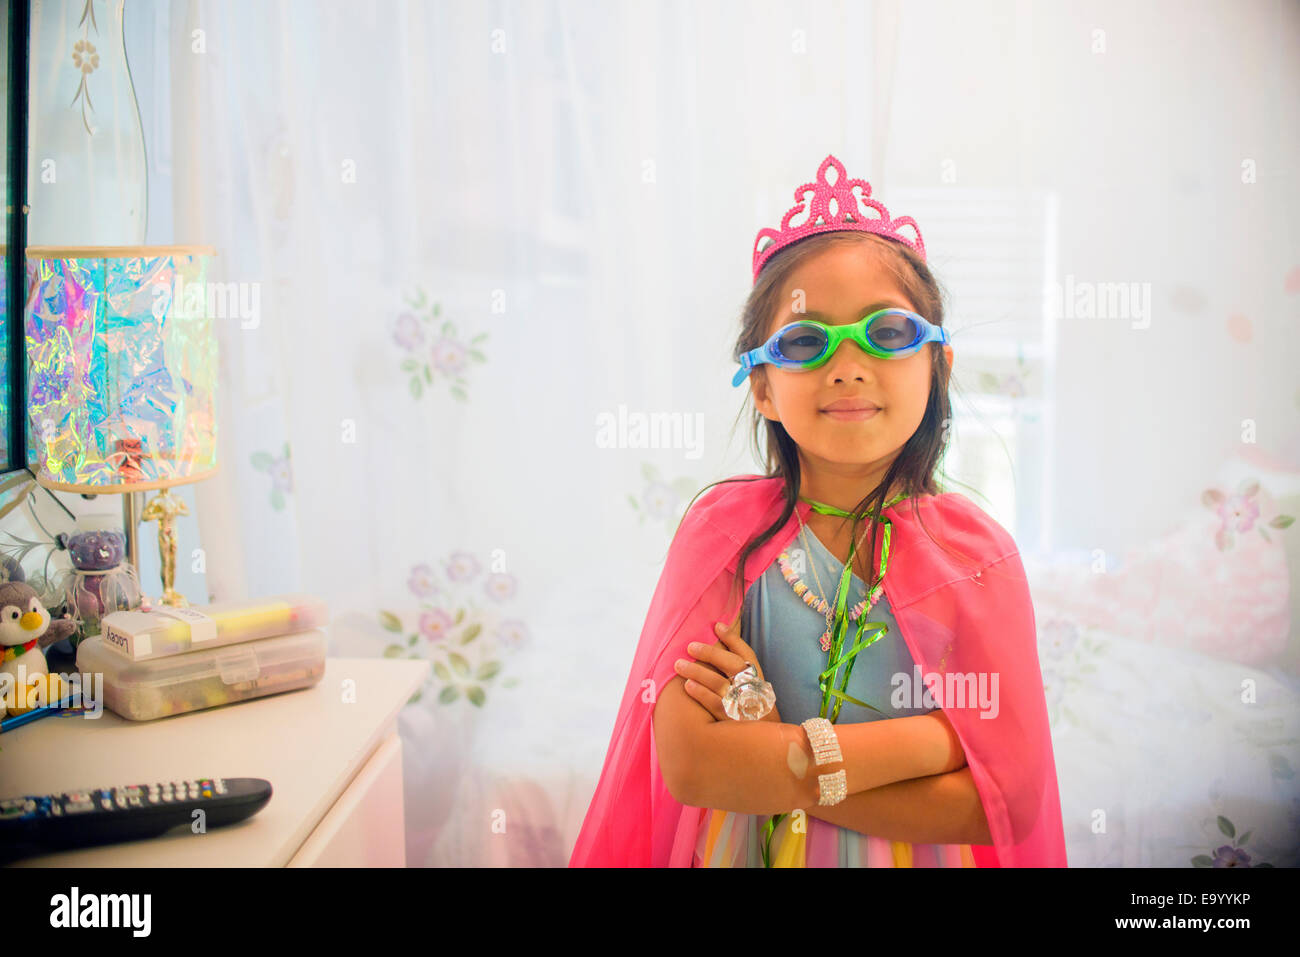 Portrait of young girl wearing fancy dress costume Stock Photo